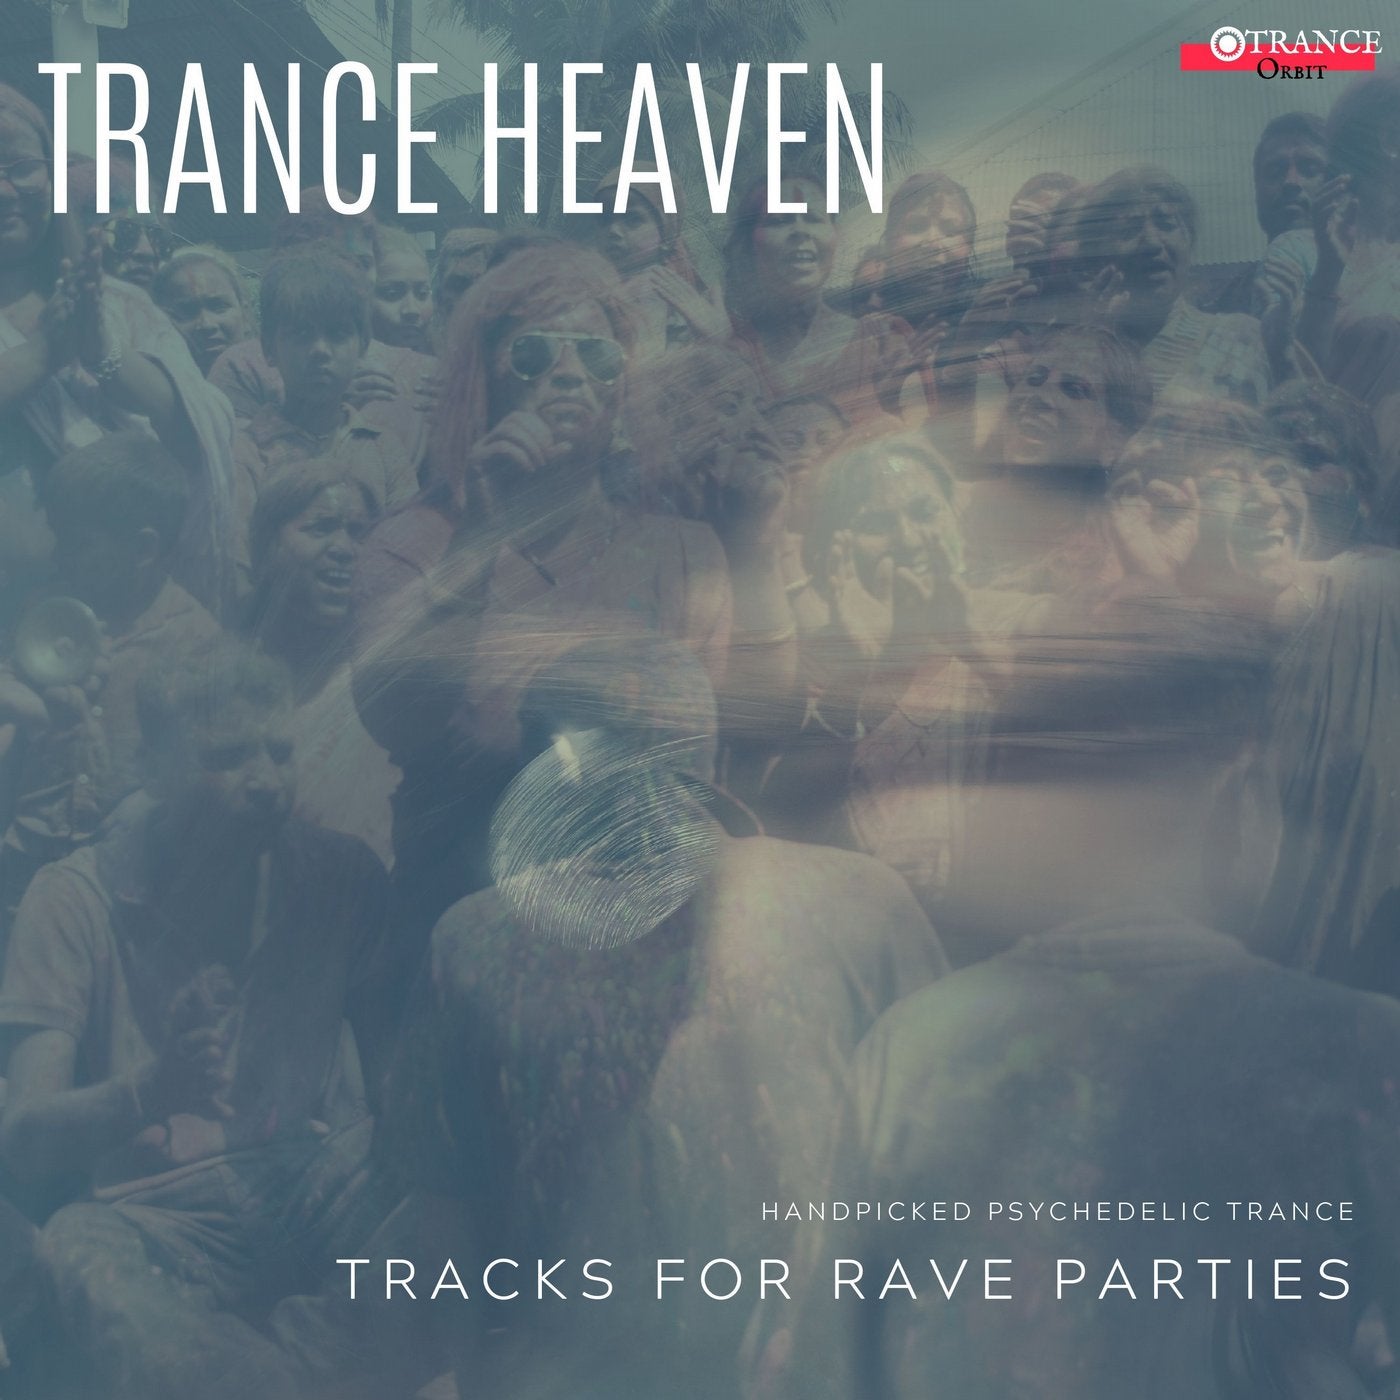 Trance Heaven - Handpicked Psychedelic Trance Tracks For Rave Parties